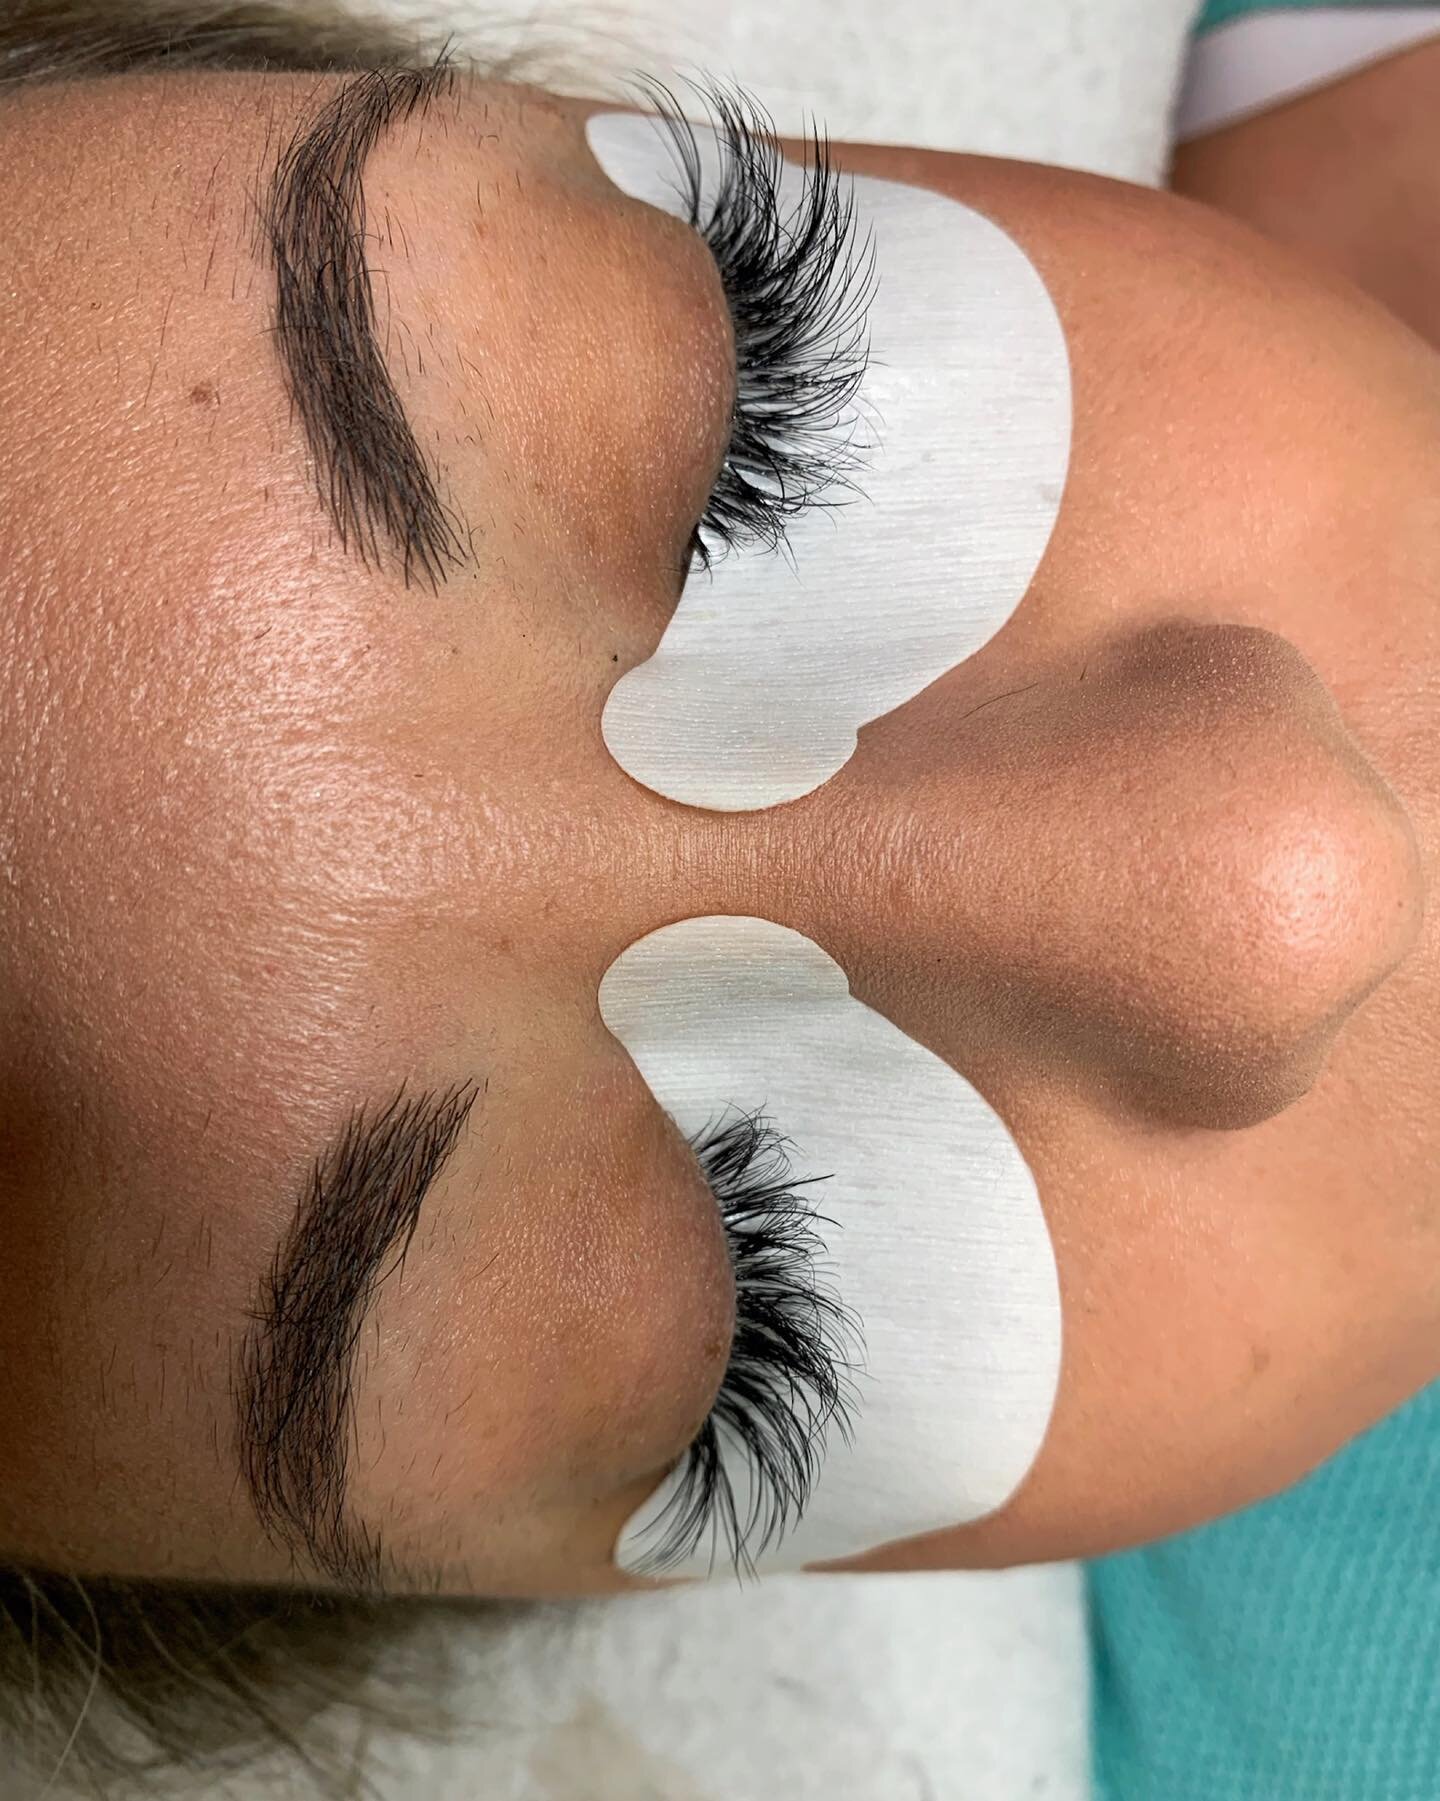 Lash Tip Tuesday:

Avoid touching your lashes! Oil will break down the adhesive! We have natural oils on our skin, the more you touch your lashes, the faster they will shed. Gently comb your lashes with a spoolie brush! Do not overcome or brush as if